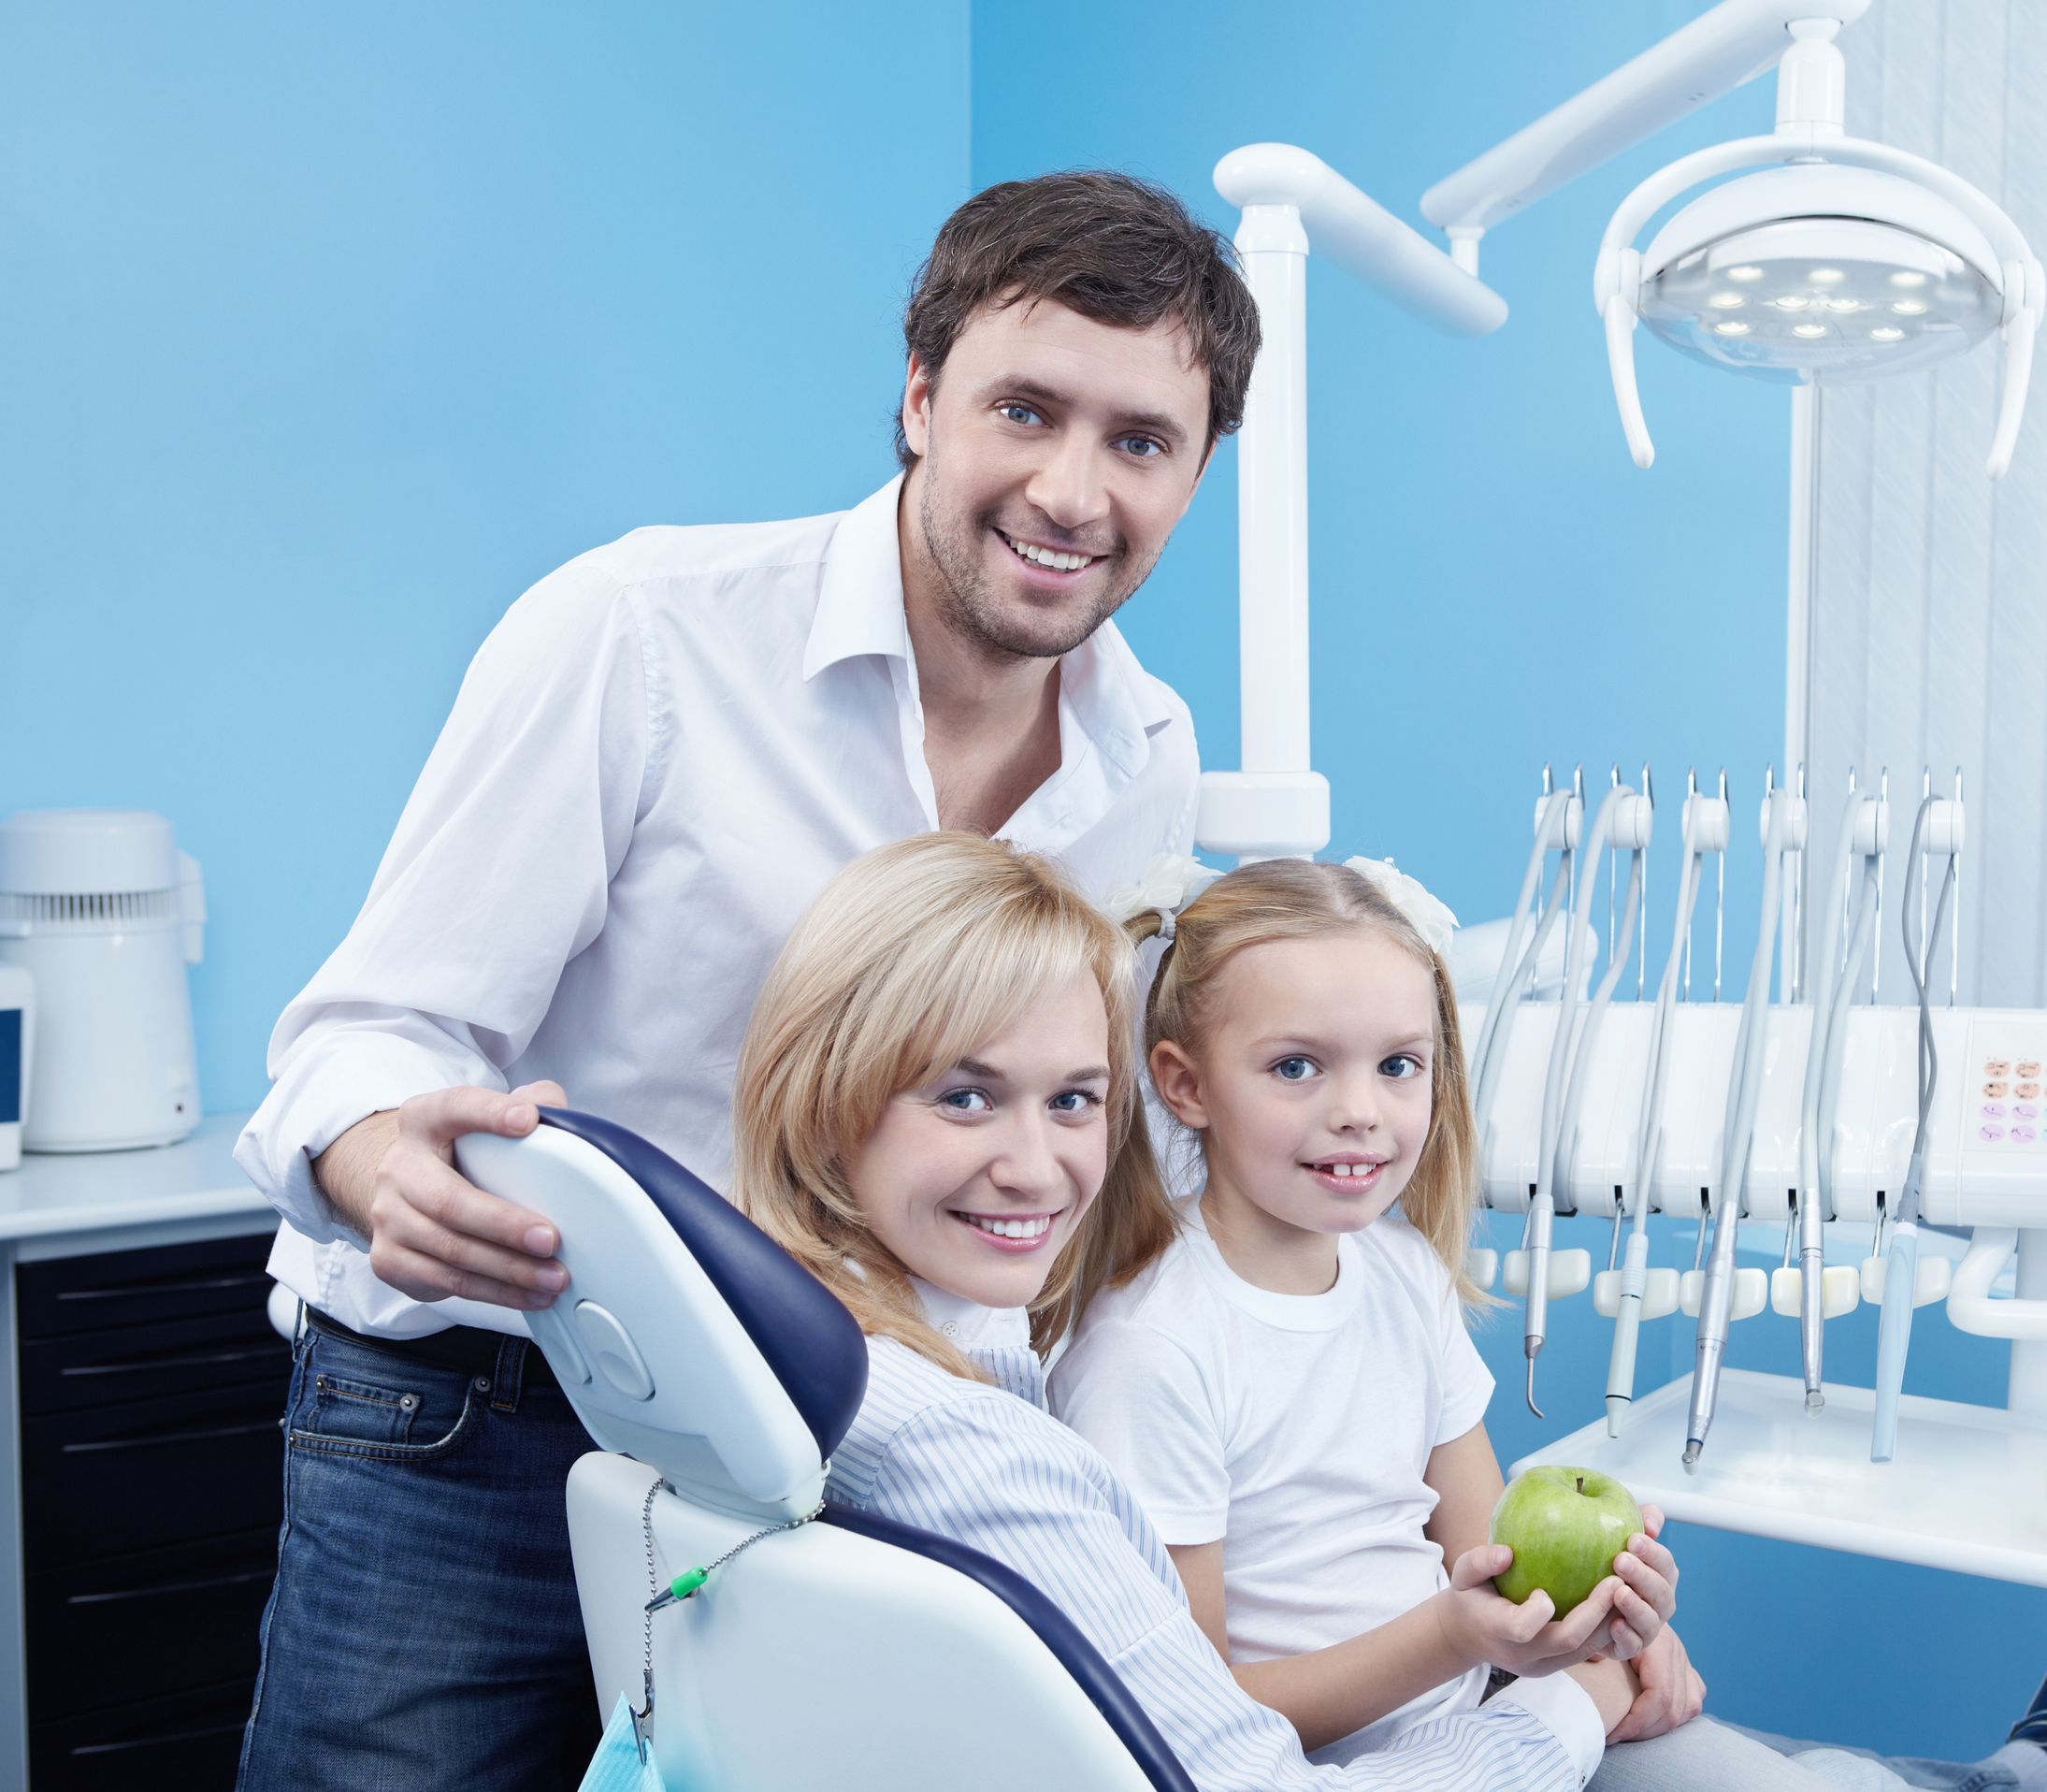 Where can I find a Fremont family dentist?